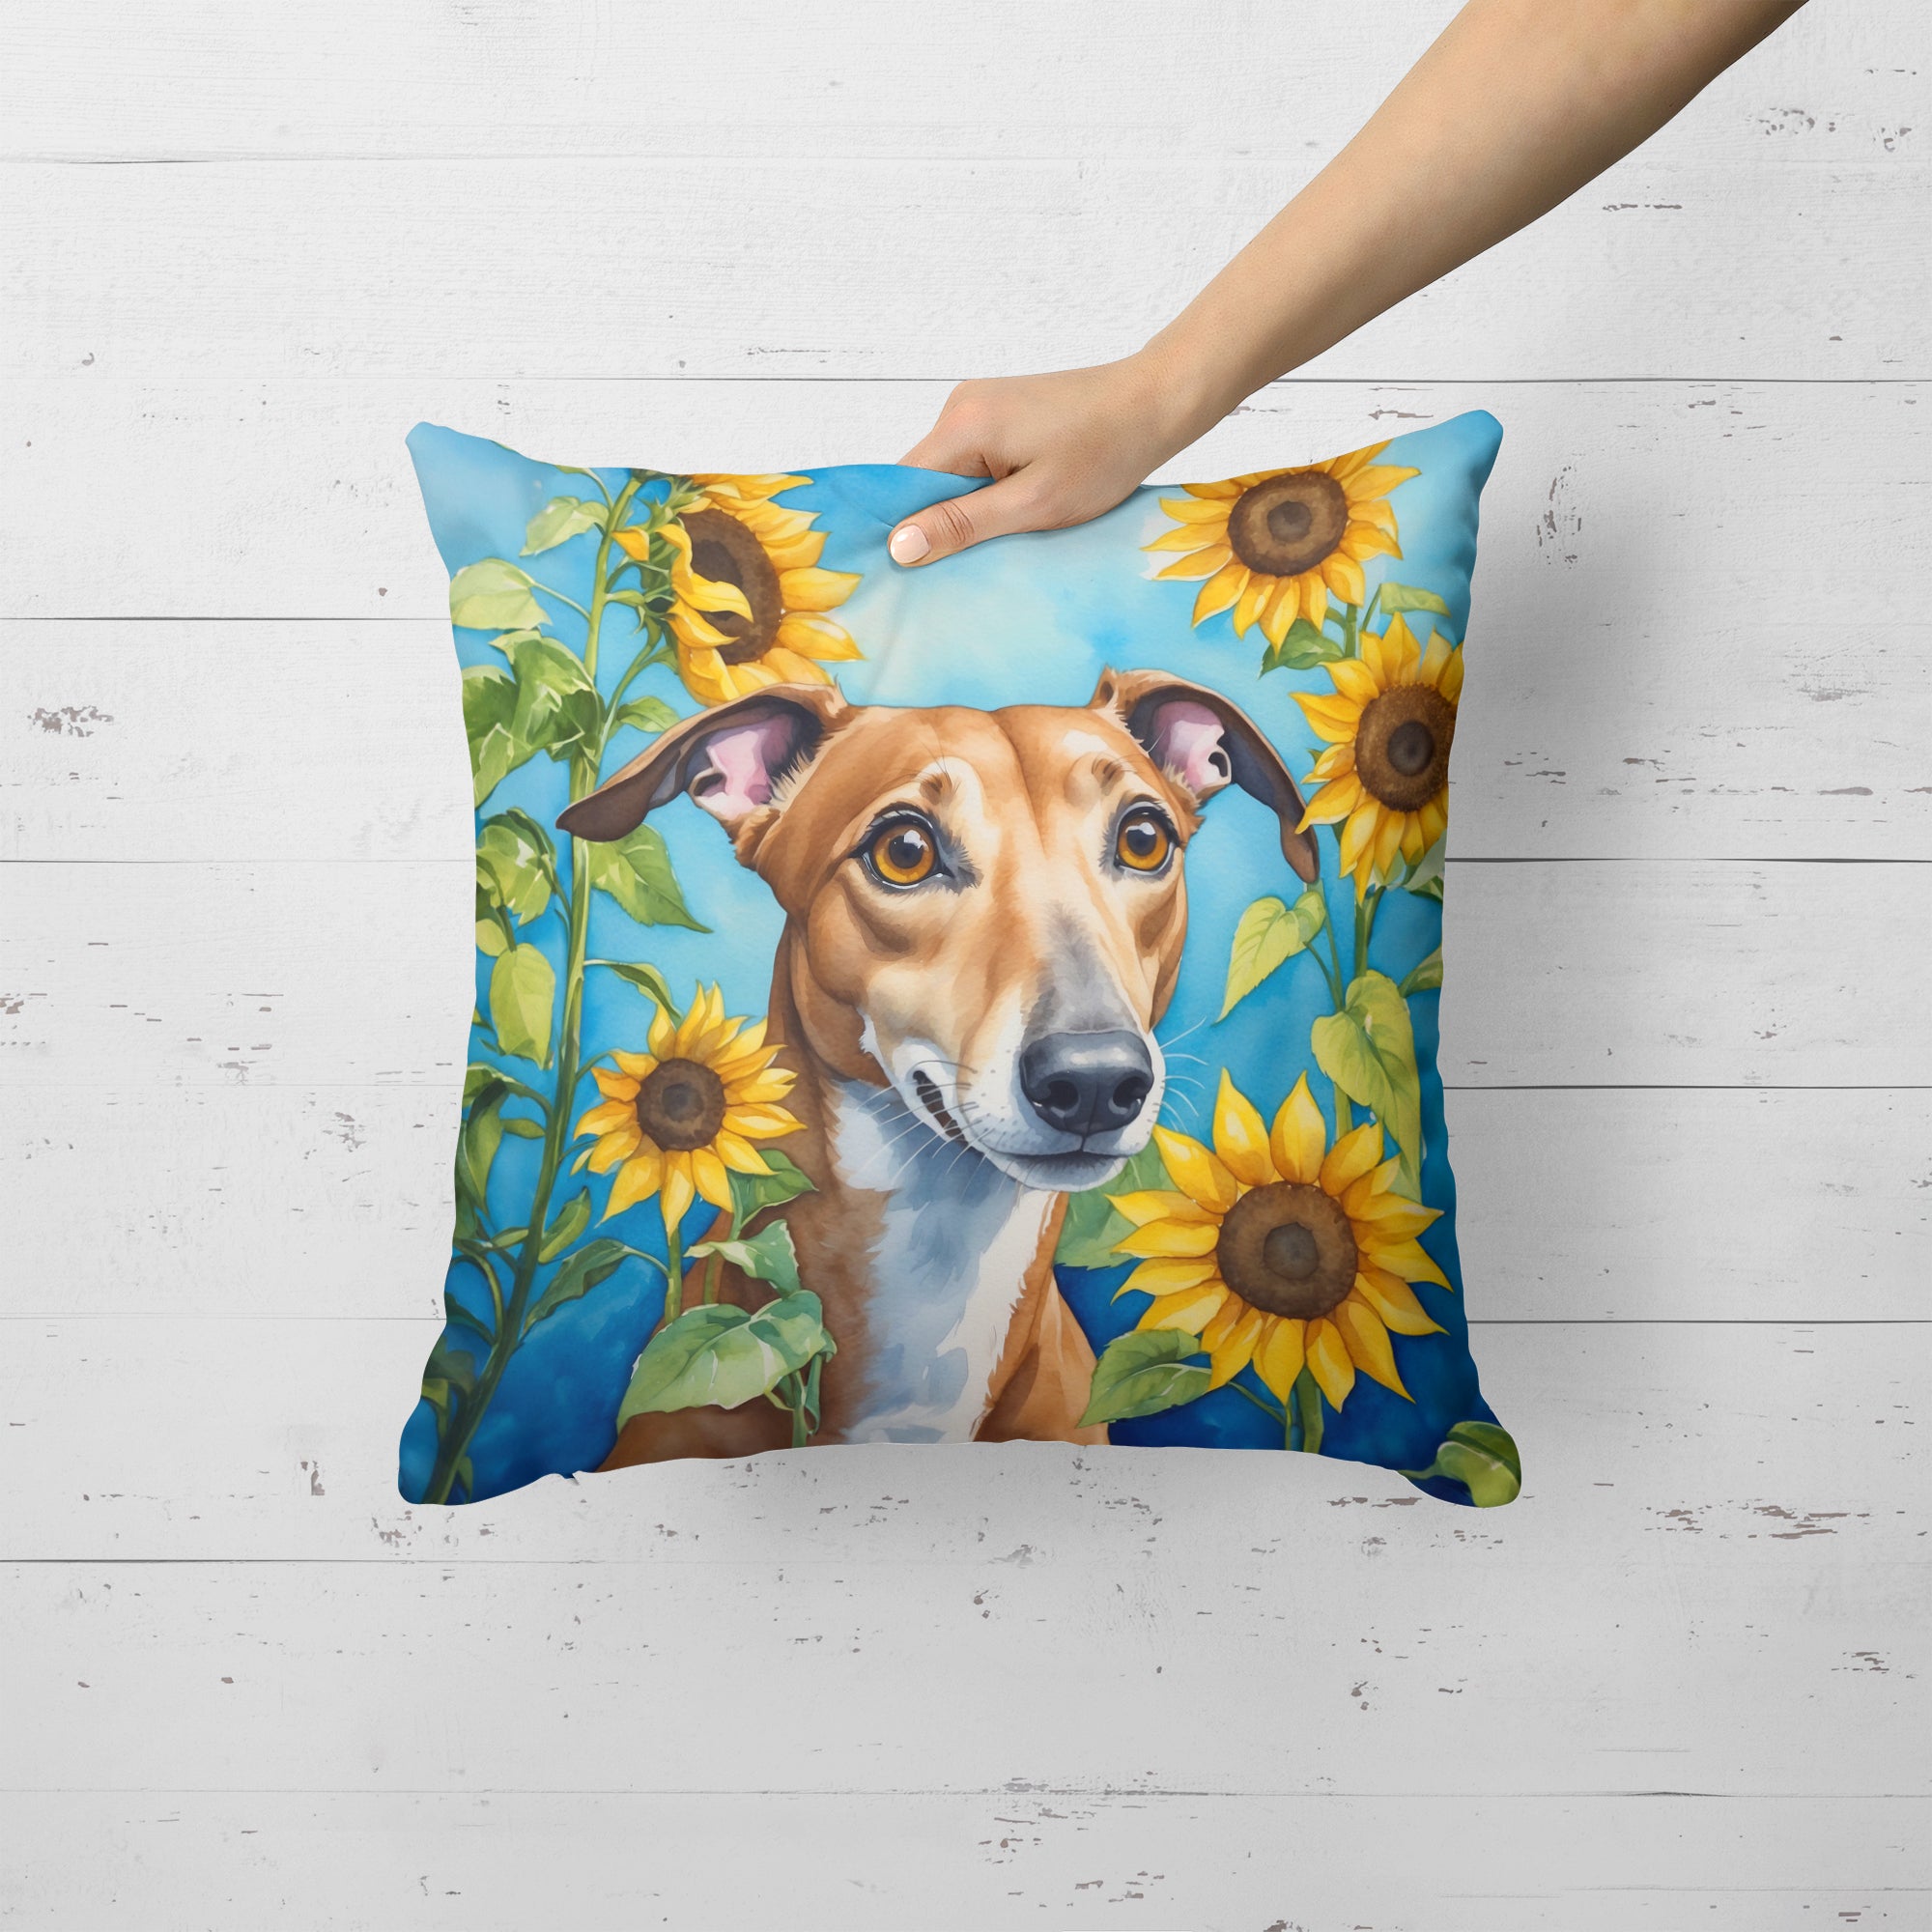 Buy this Greyhound in Sunflowers Throw Pillow